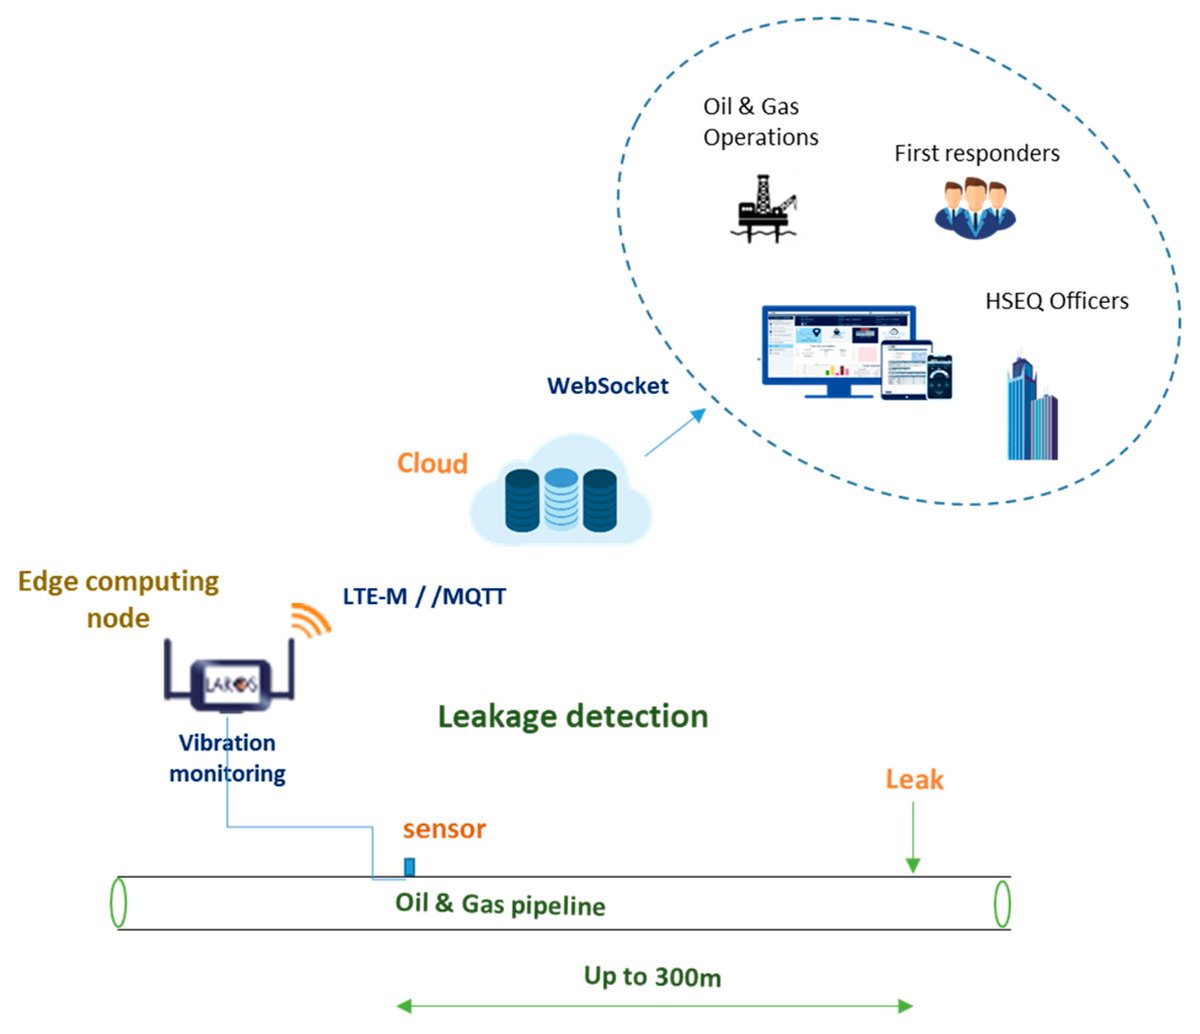 A Combined Semi-Supervised Deep Learning Method for Oil Leak Detection in Pipelines Using IIoT at the Edge mdpi.com/1424-8220/22/1… #leakagedetection #DeepLearning #CNN